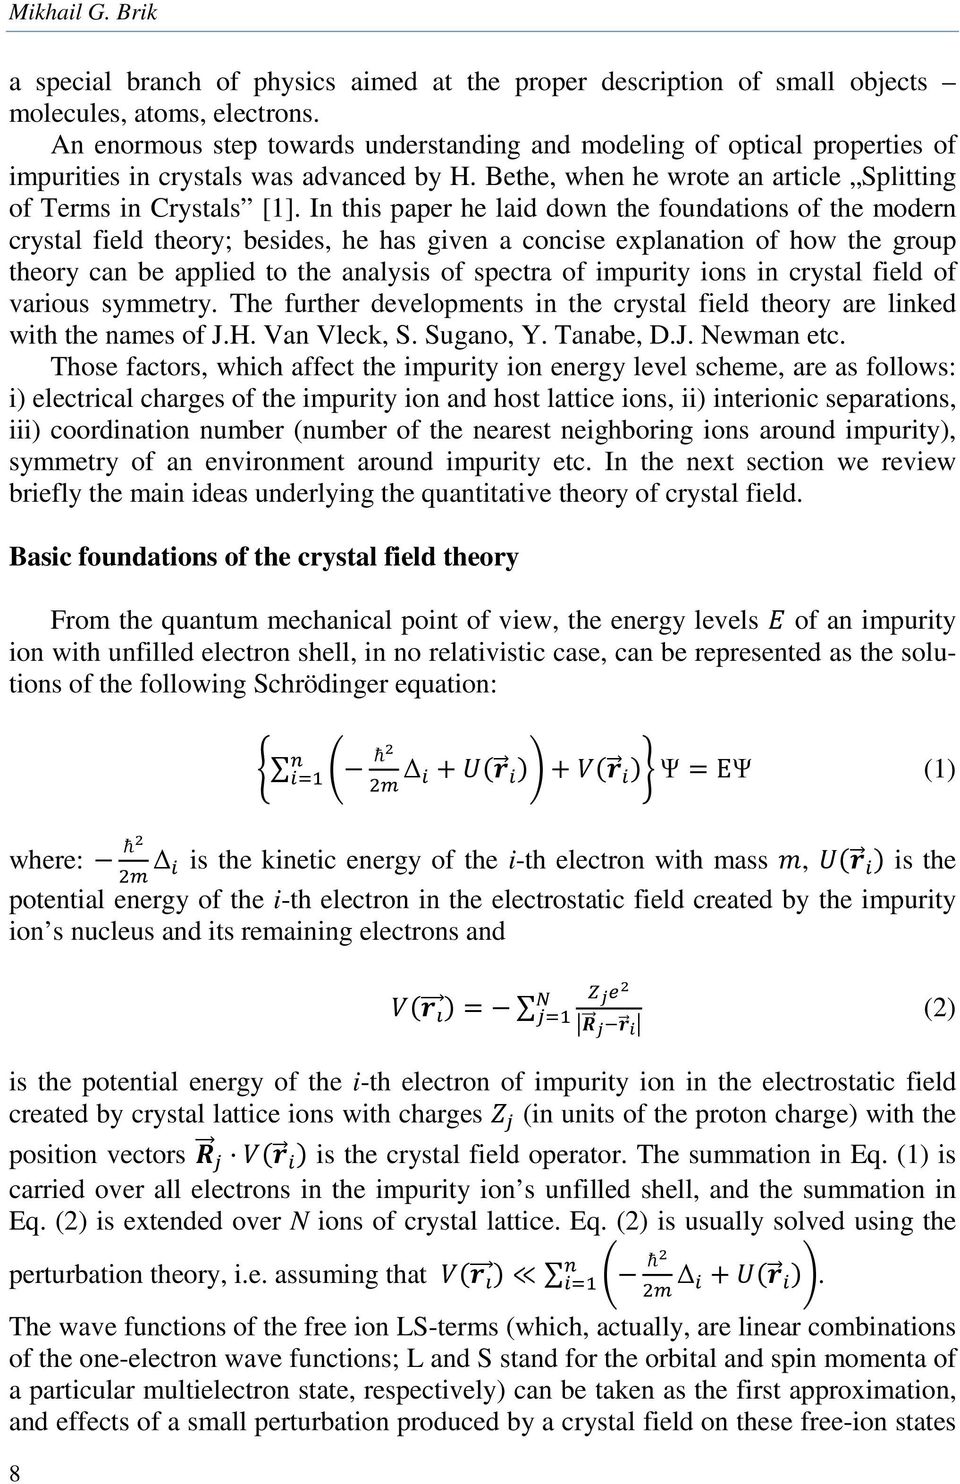 In this paper he laid down the foundations of the modern crystal field theory; besides, he has given a concise explanation of how the group theory can be applied to the analysis of spectra of